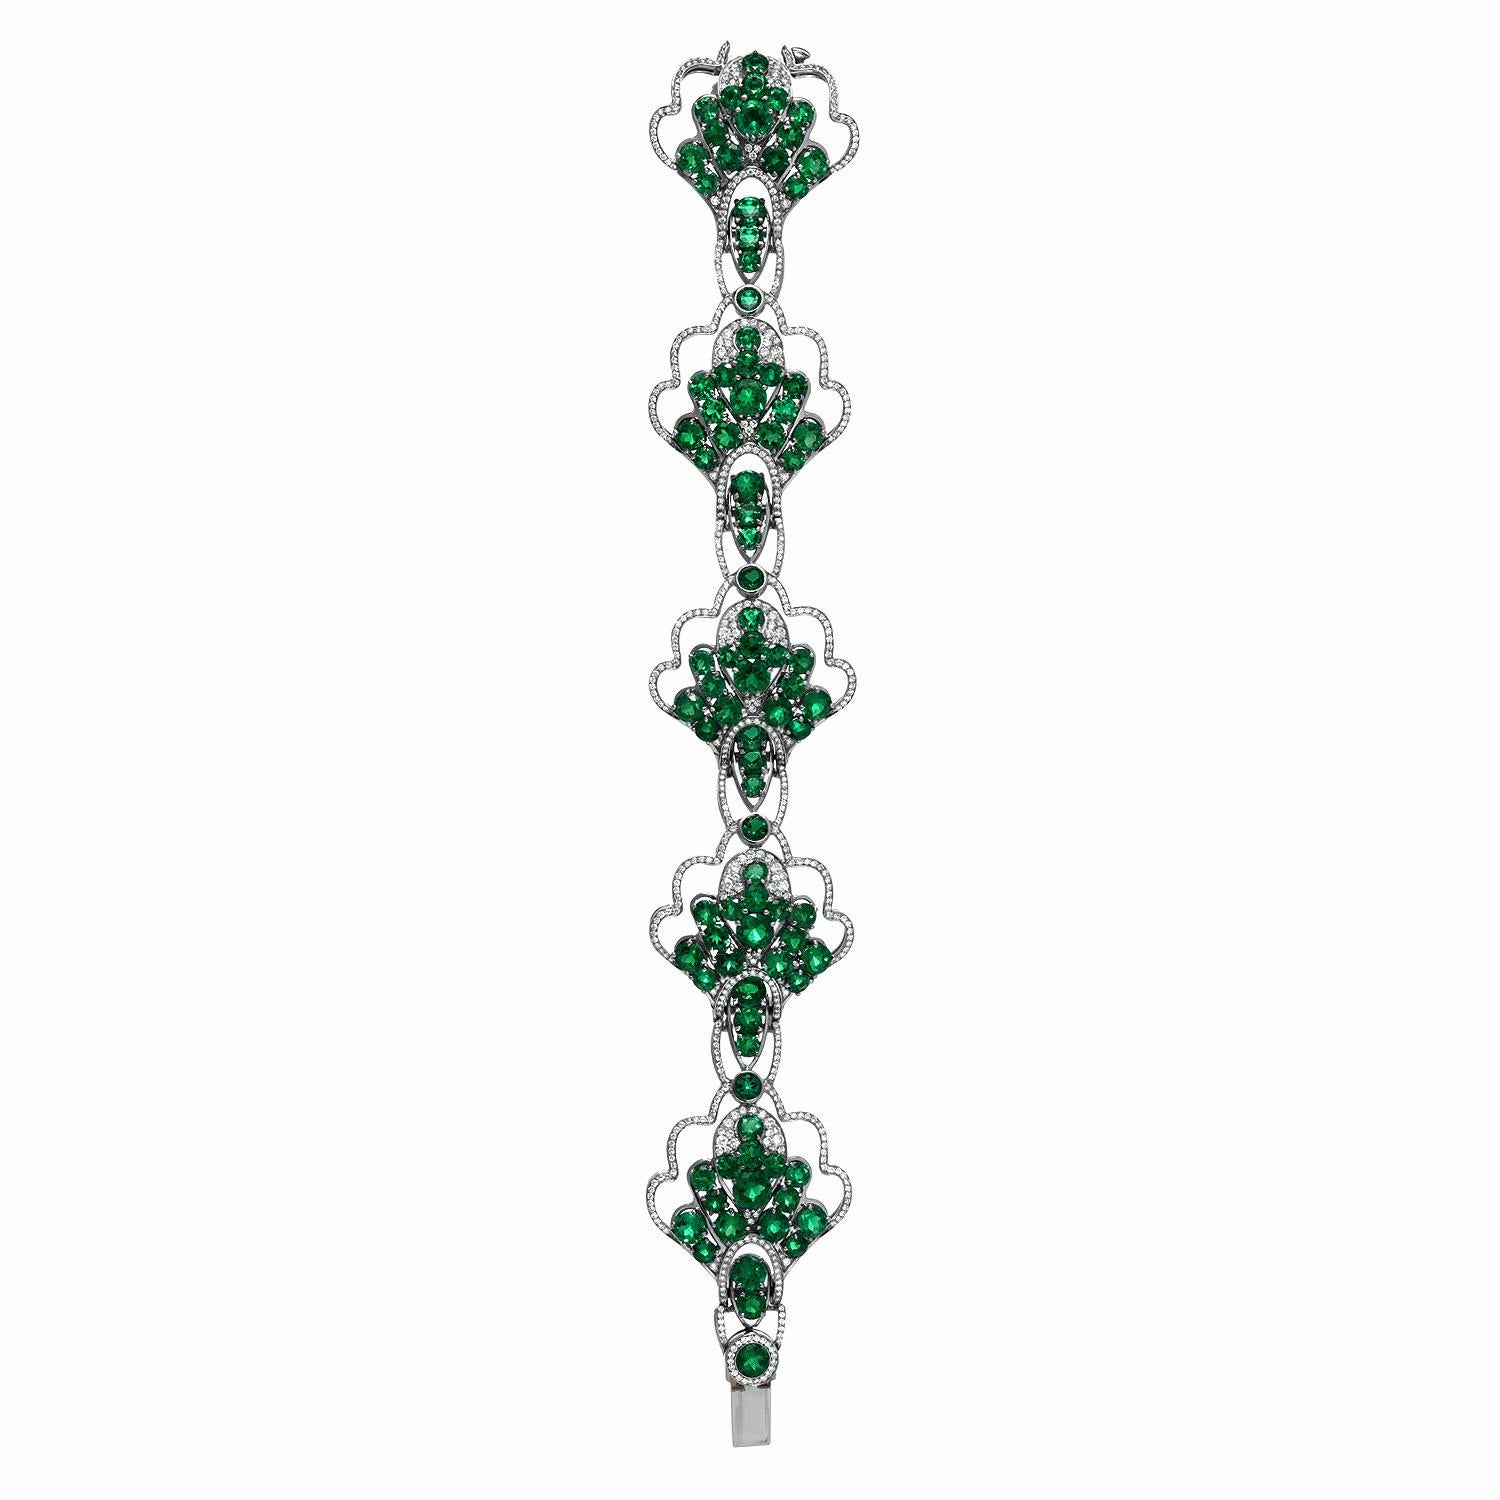 Exceptional quality Colombian Emeralds weighing a total of 18.90 carats, adorned by a total of 2.28 carat E-F/VVS round brilliant diamonds, comprise this coveted platinum bracelet.
Crafted by extremely skilled hands in the USA.
Length: 7 inches in